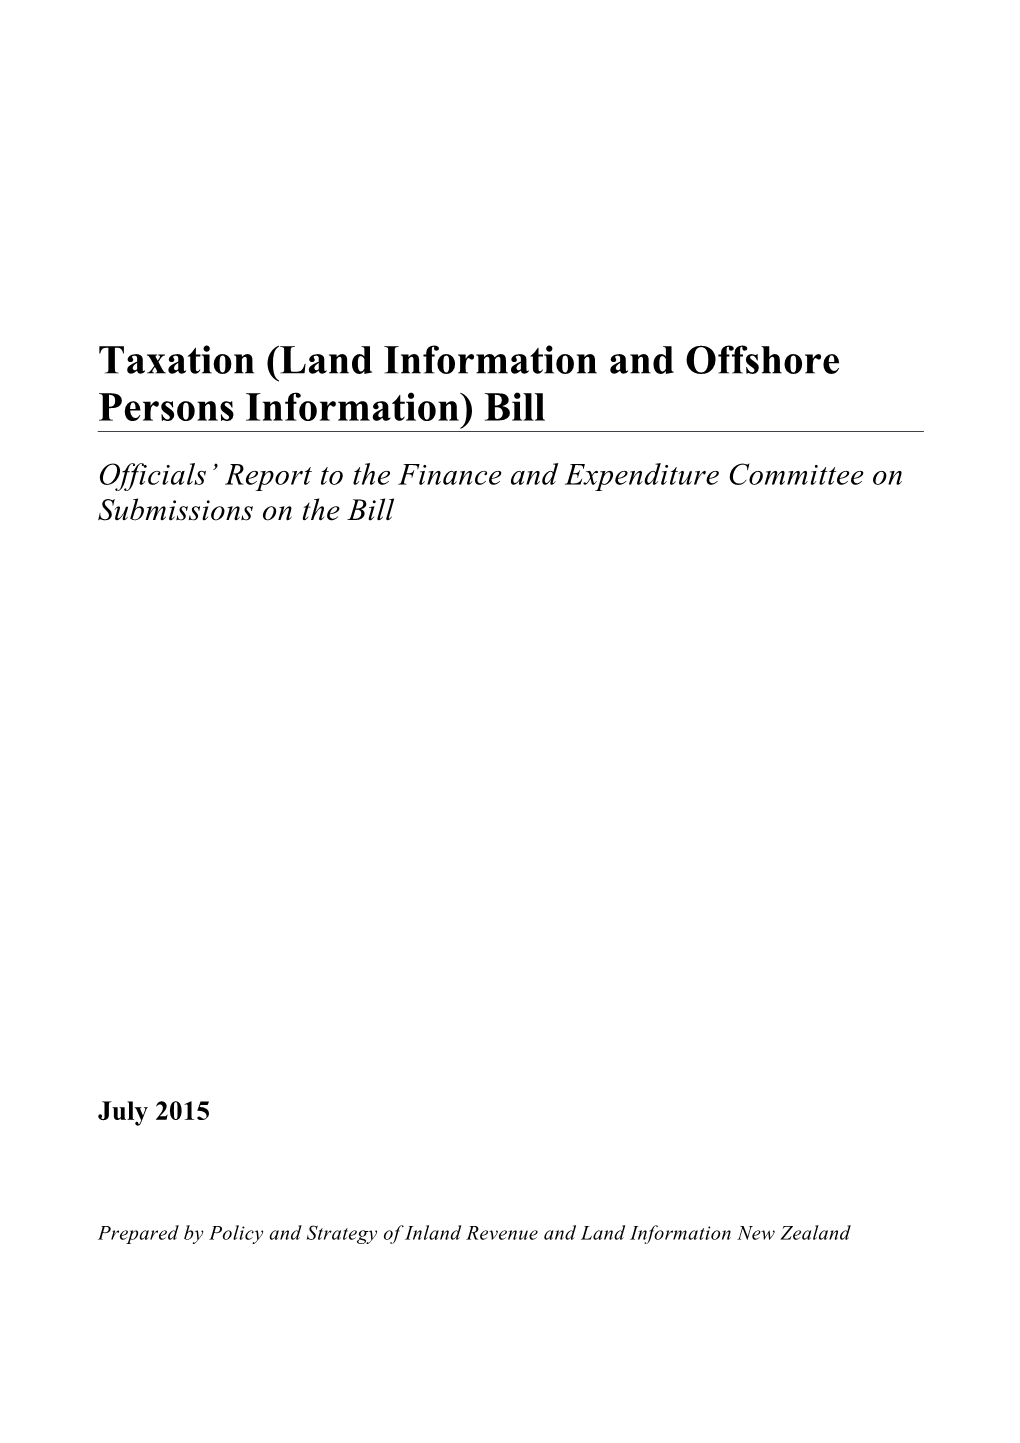 Taxation (Land Information and Offshore Persons Information) Bill s1